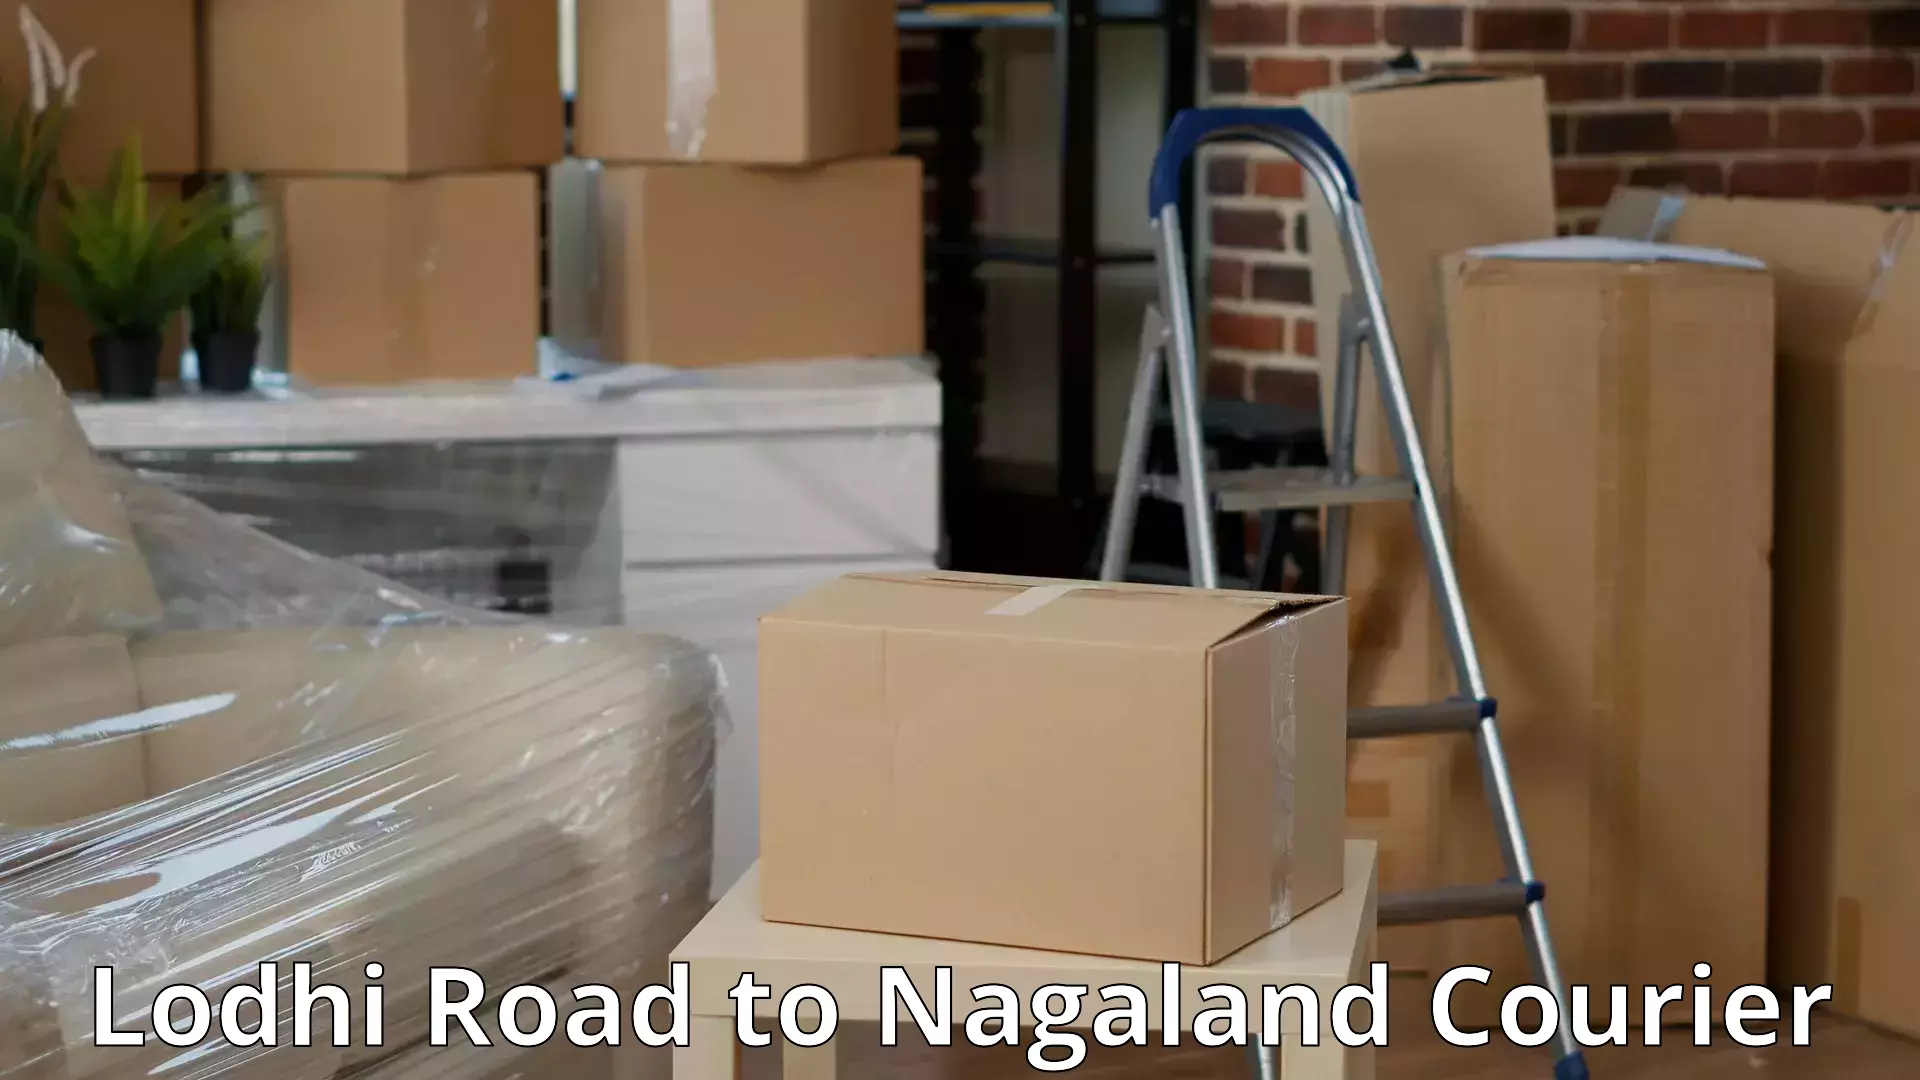 Furniture transport specialists Lodhi Road to Nagaland